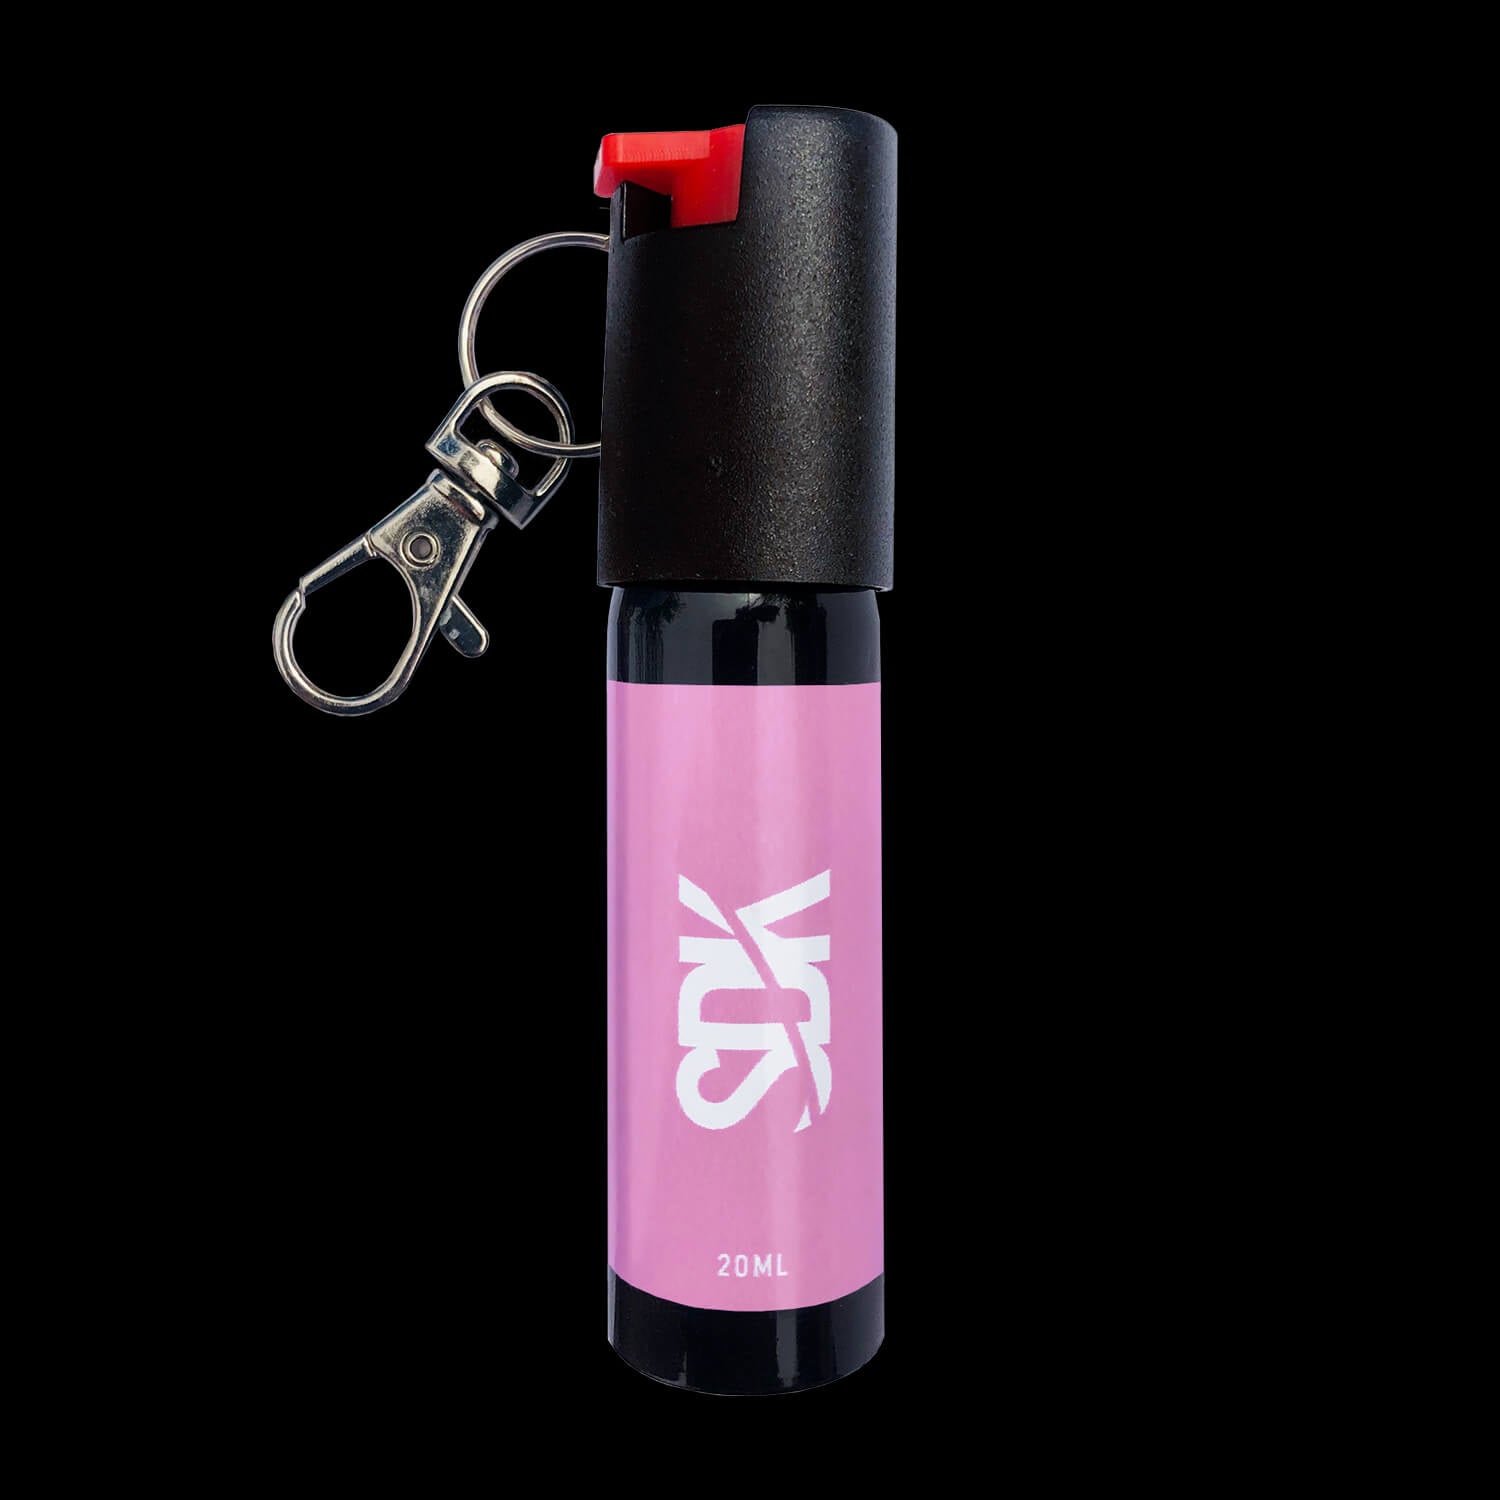 SDK Pepper Spray Pink (20ml compact Pepper Spray with keychain attachment)